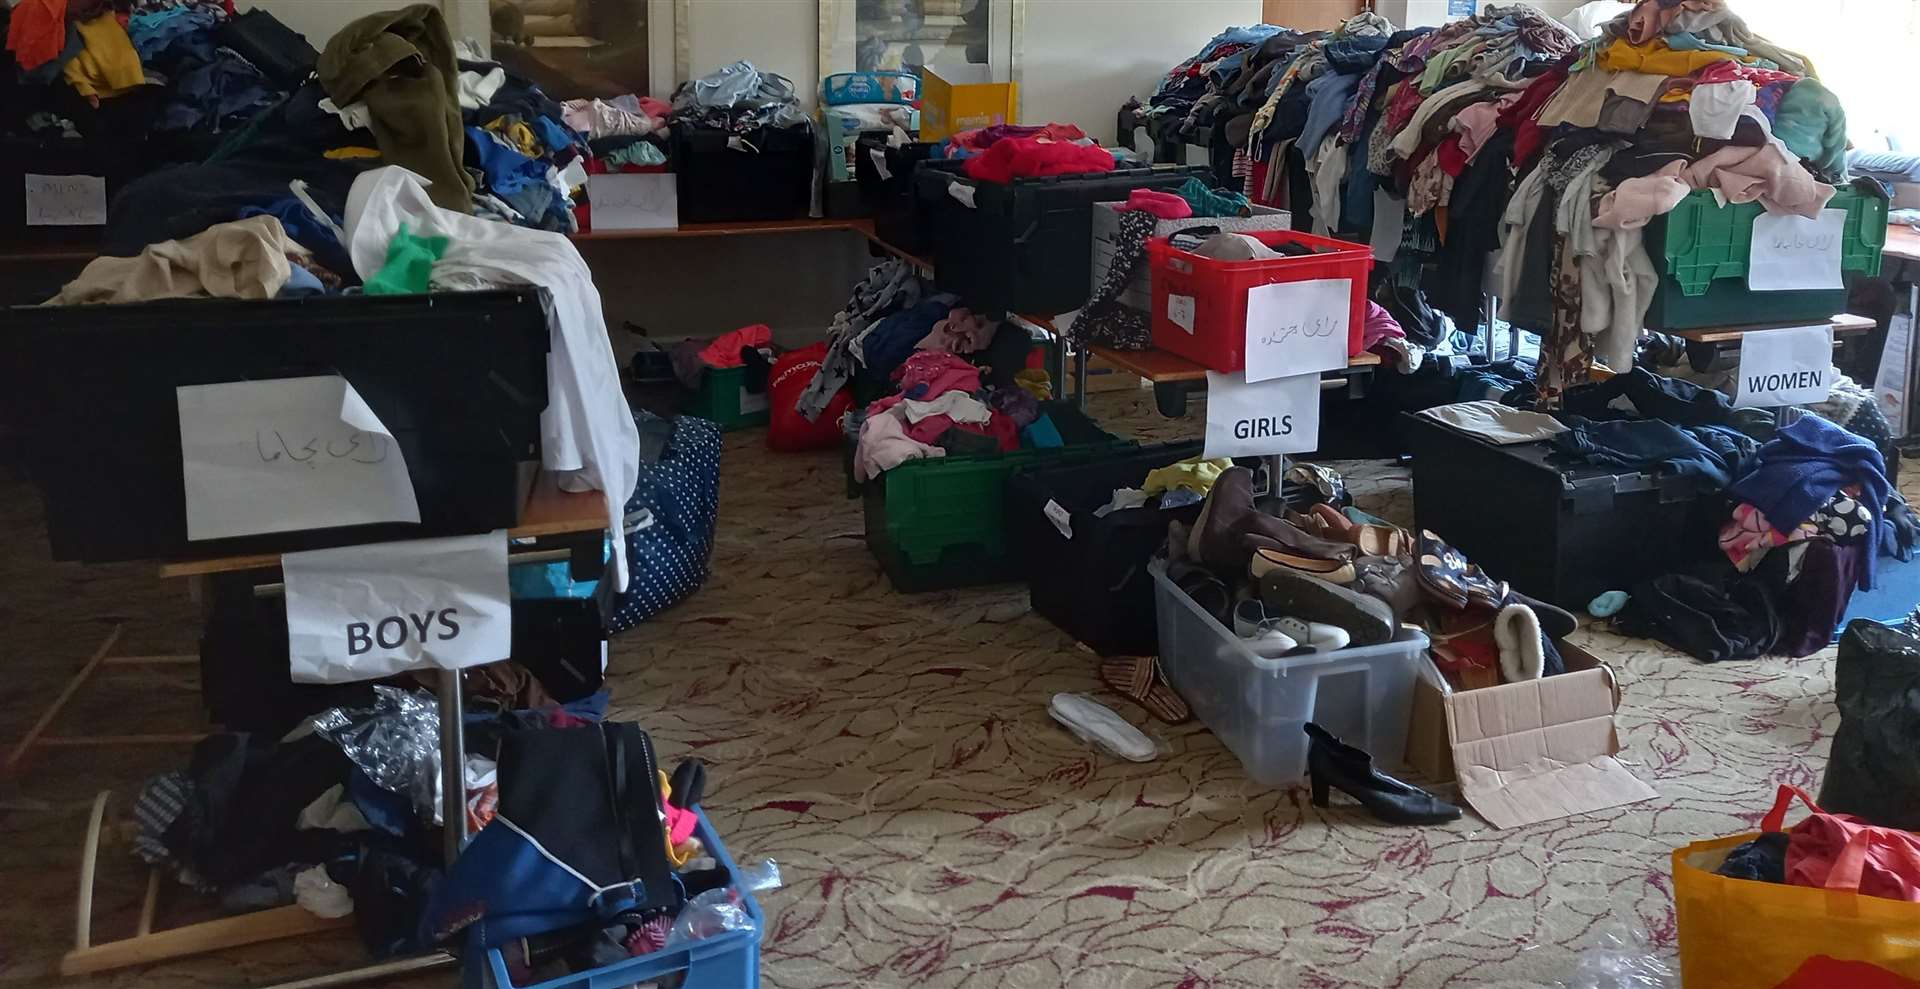 Donations for the refugees are piling up in Ashford